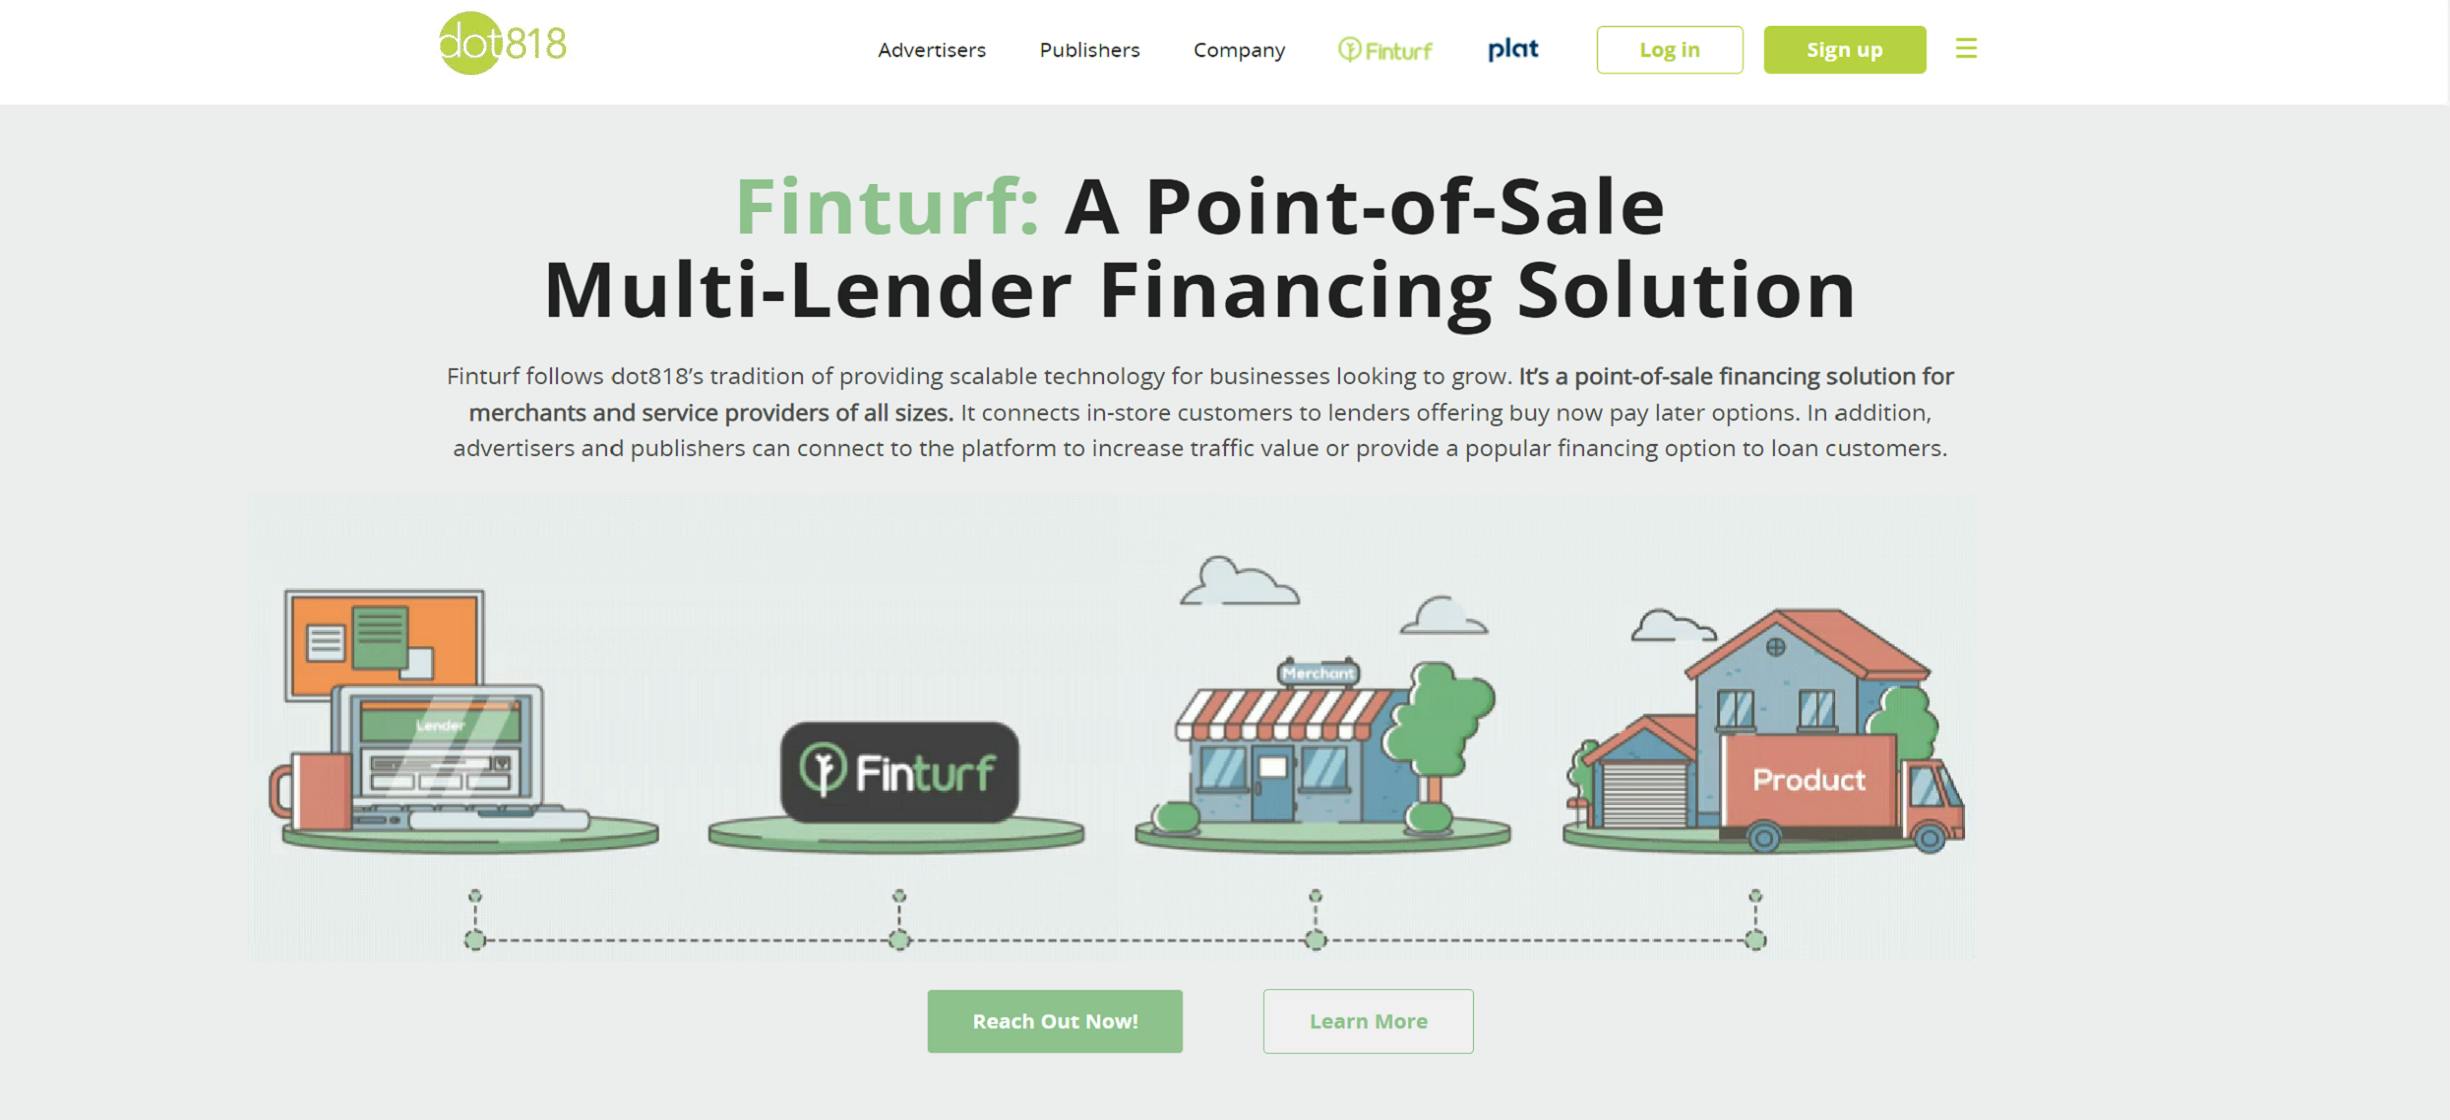 A Point-of-Sale Multi-Lender Financing Solution